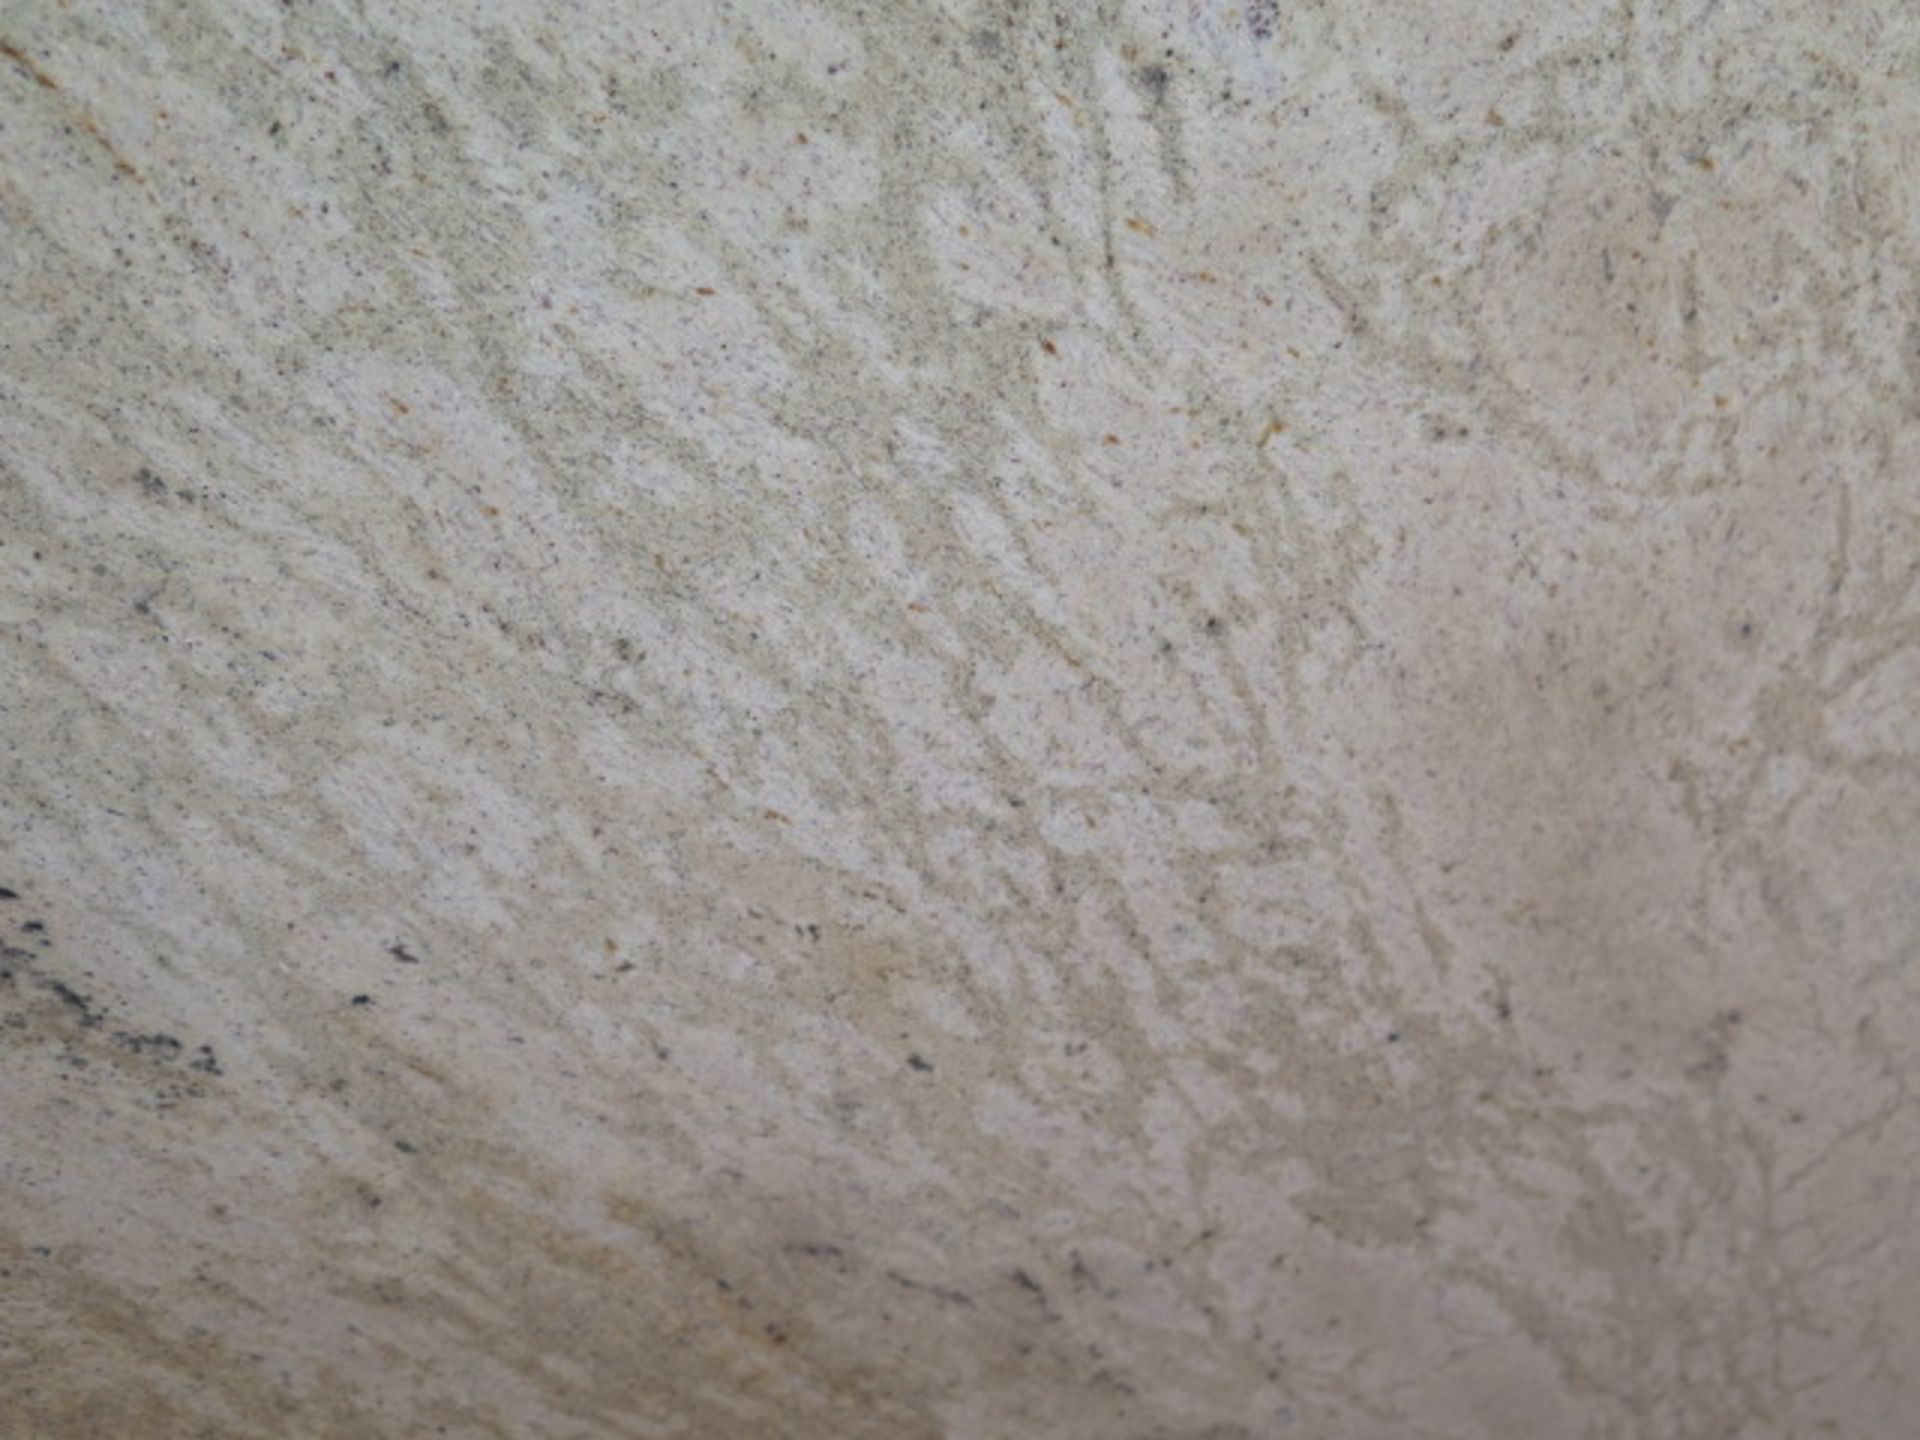 Madagascar Granite (4 Slabs) (SOLD AS-IS - NO WARRANTY) - Image 6 of 8